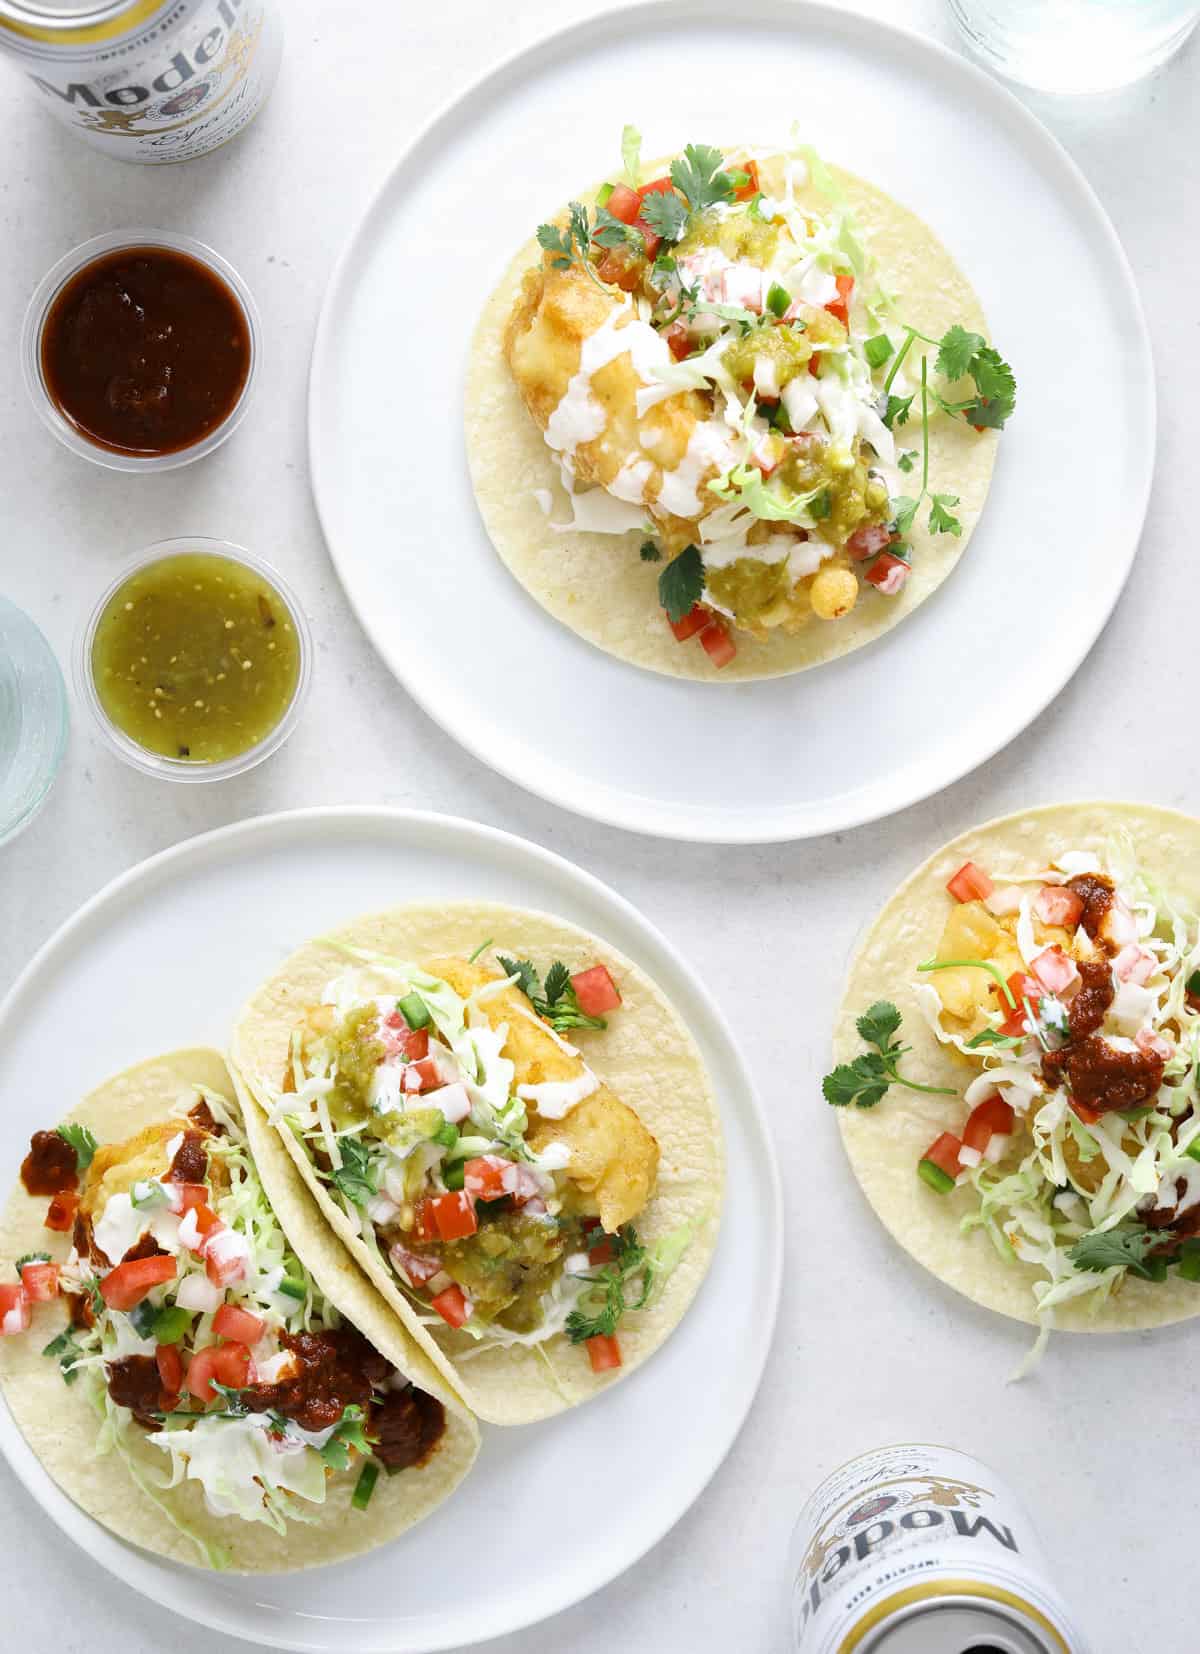 Two small white plates filled with tacos and surrounded by cups of red and green salsa and cans of Mexican beer.